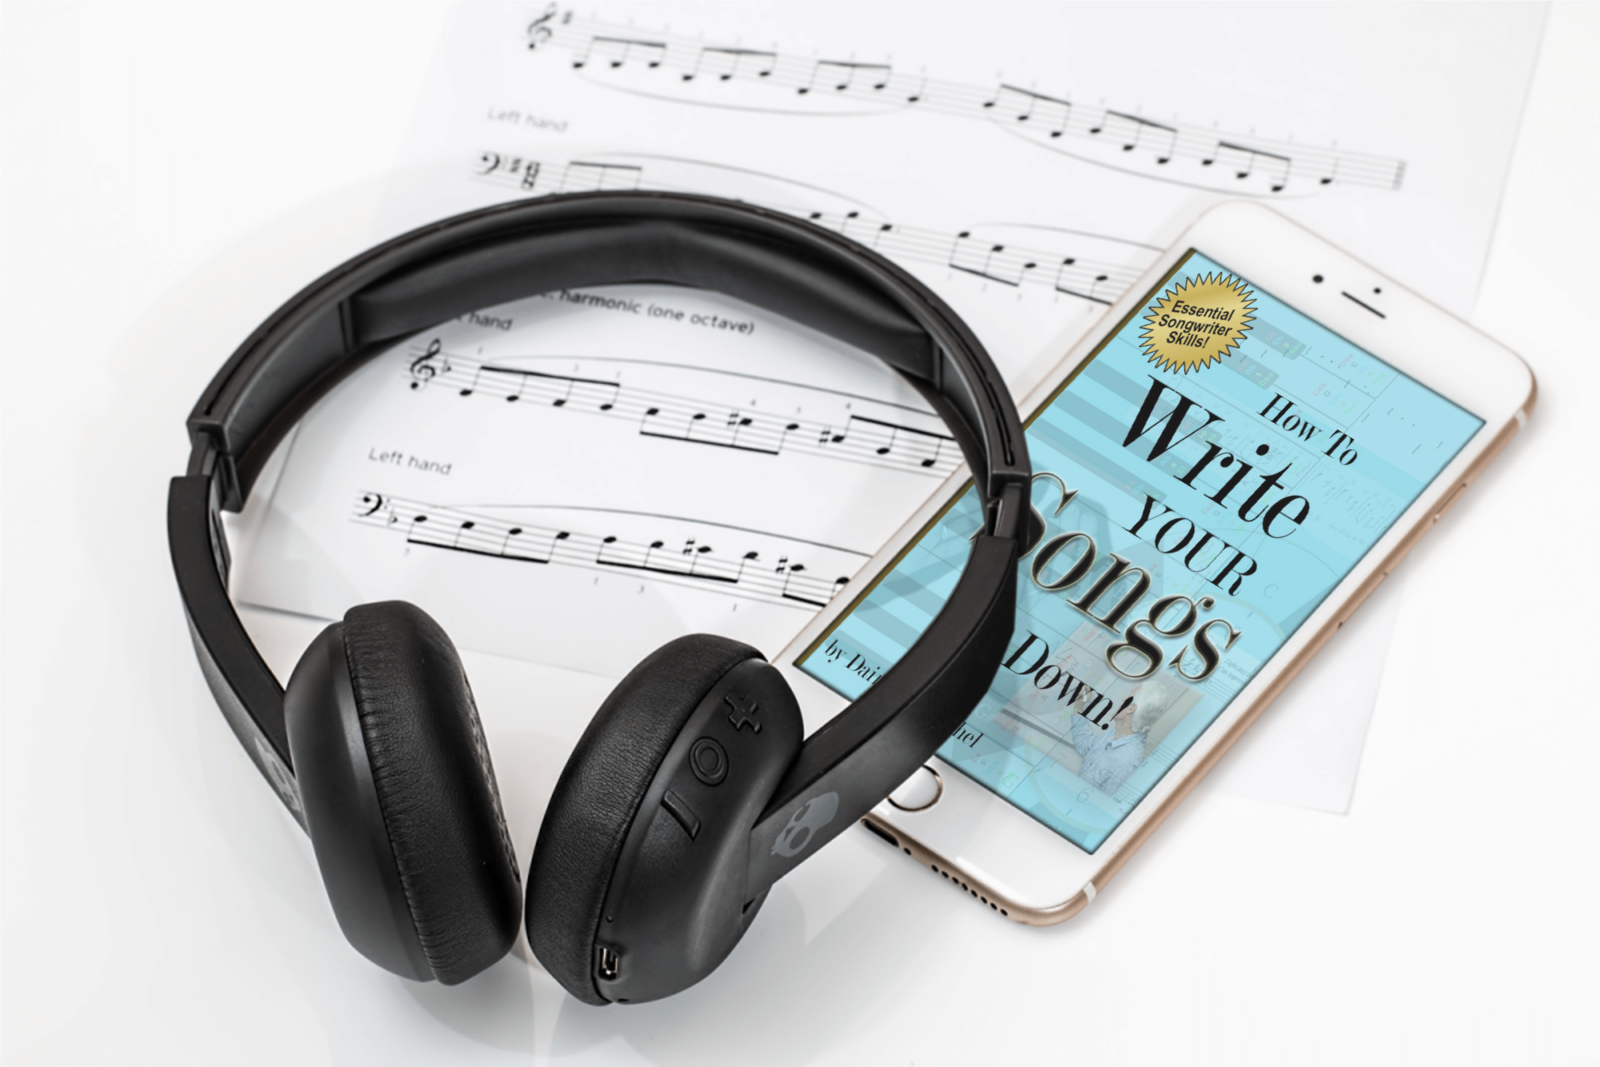 Pleased to Announce the Re-Launch of My “How to Write YOUR Songs Down!” eLearning Product